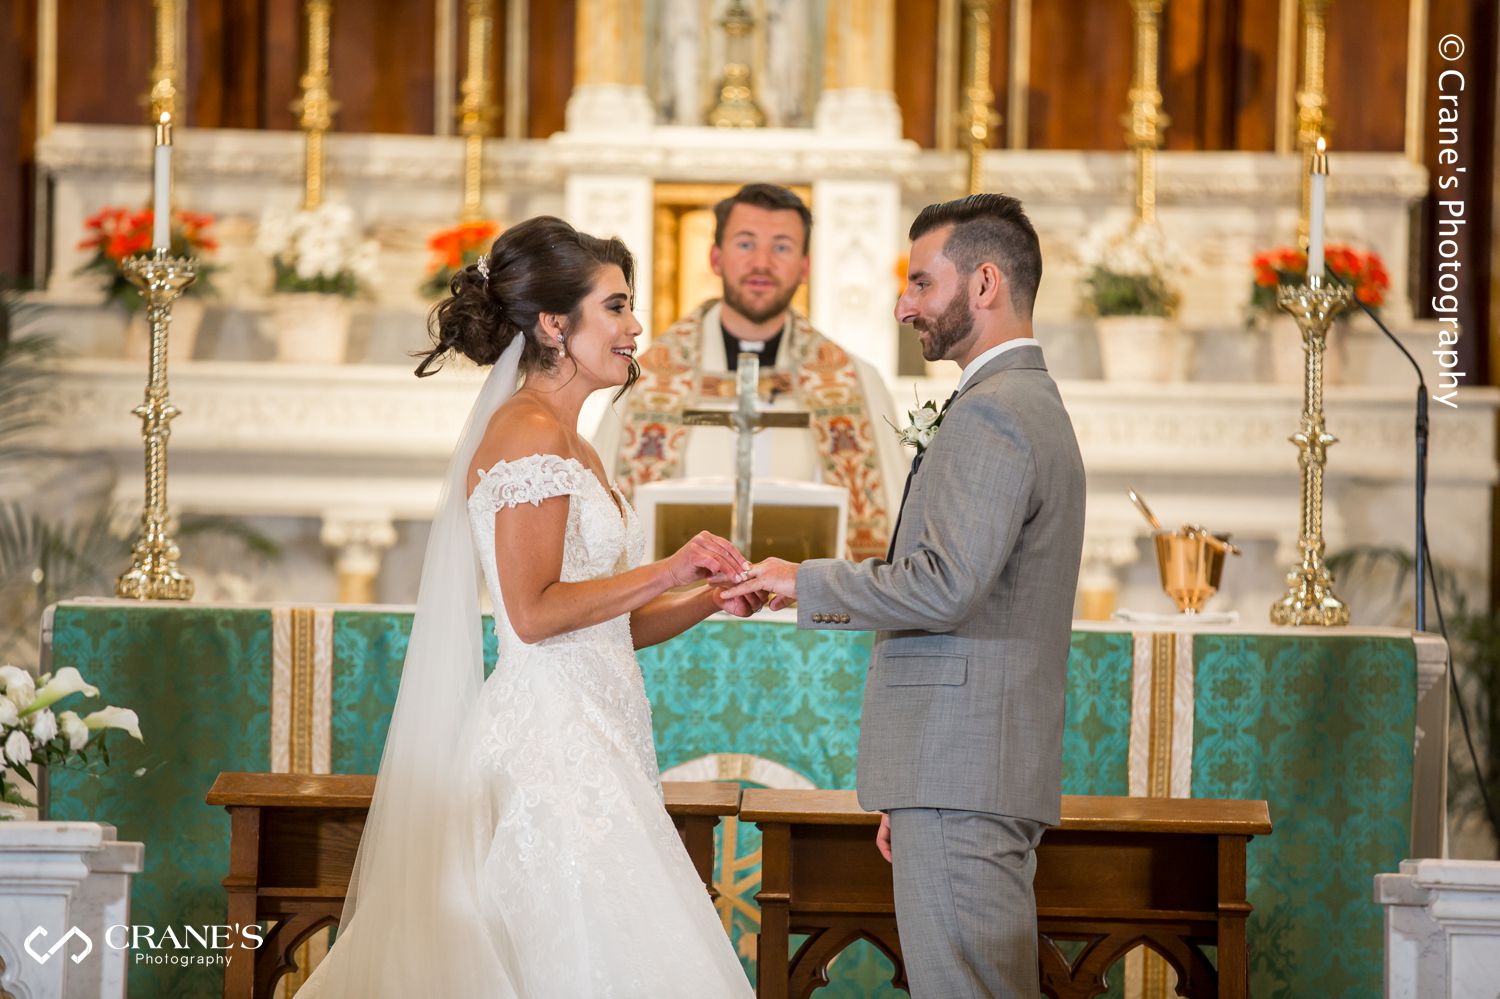 Lisa and Joe exchange rings at the altar of St. Peter and Paul Church in Naperville